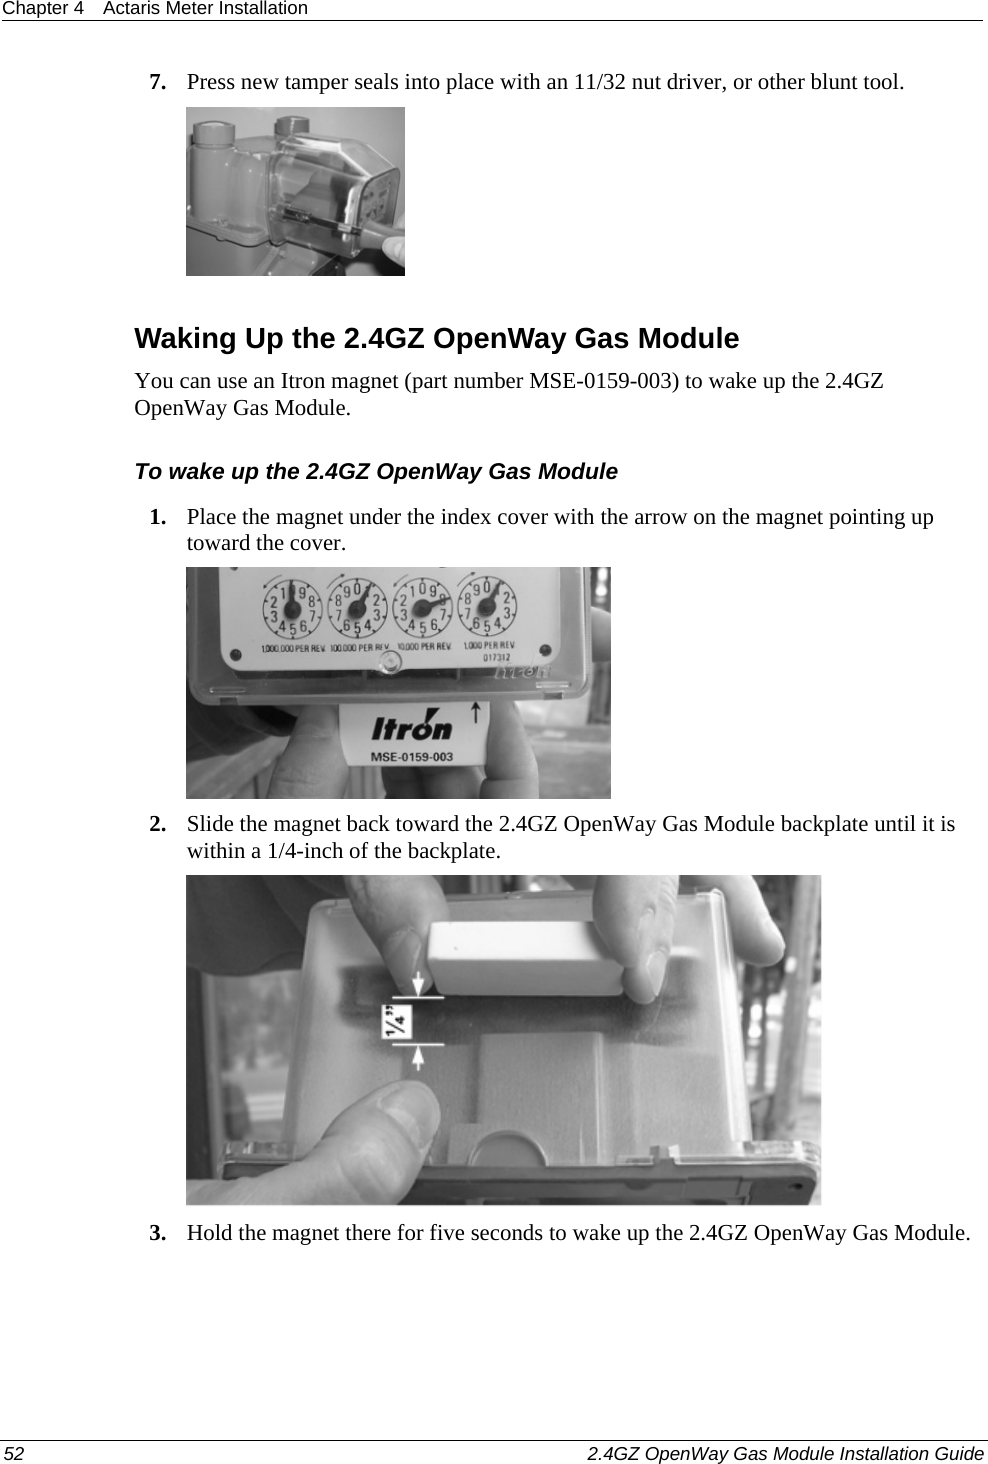 Chapter 4  Actaris Meter Installation  52    2.4GZ OpenWay Gas Module Installation Guide  7. Press new tamper seals into place with an 11/32 nut driver, or other blunt tool.   Waking Up the 2.4GZ OpenWay Gas Module You can use an Itron magnet (part number MSE-0159-003) to wake up the 2.4GZ OpenWay Gas Module. To wake up the 2.4GZ OpenWay Gas Module 1. Place the magnet under the index cover with the arrow on the magnet pointing up toward the cover.  2. Slide the magnet back toward the 2.4GZ OpenWay Gas Module backplate until it is within a 1/4-inch of the backplate.  3. Hold the magnet there for five seconds to wake up the 2.4GZ OpenWay Gas Module.  